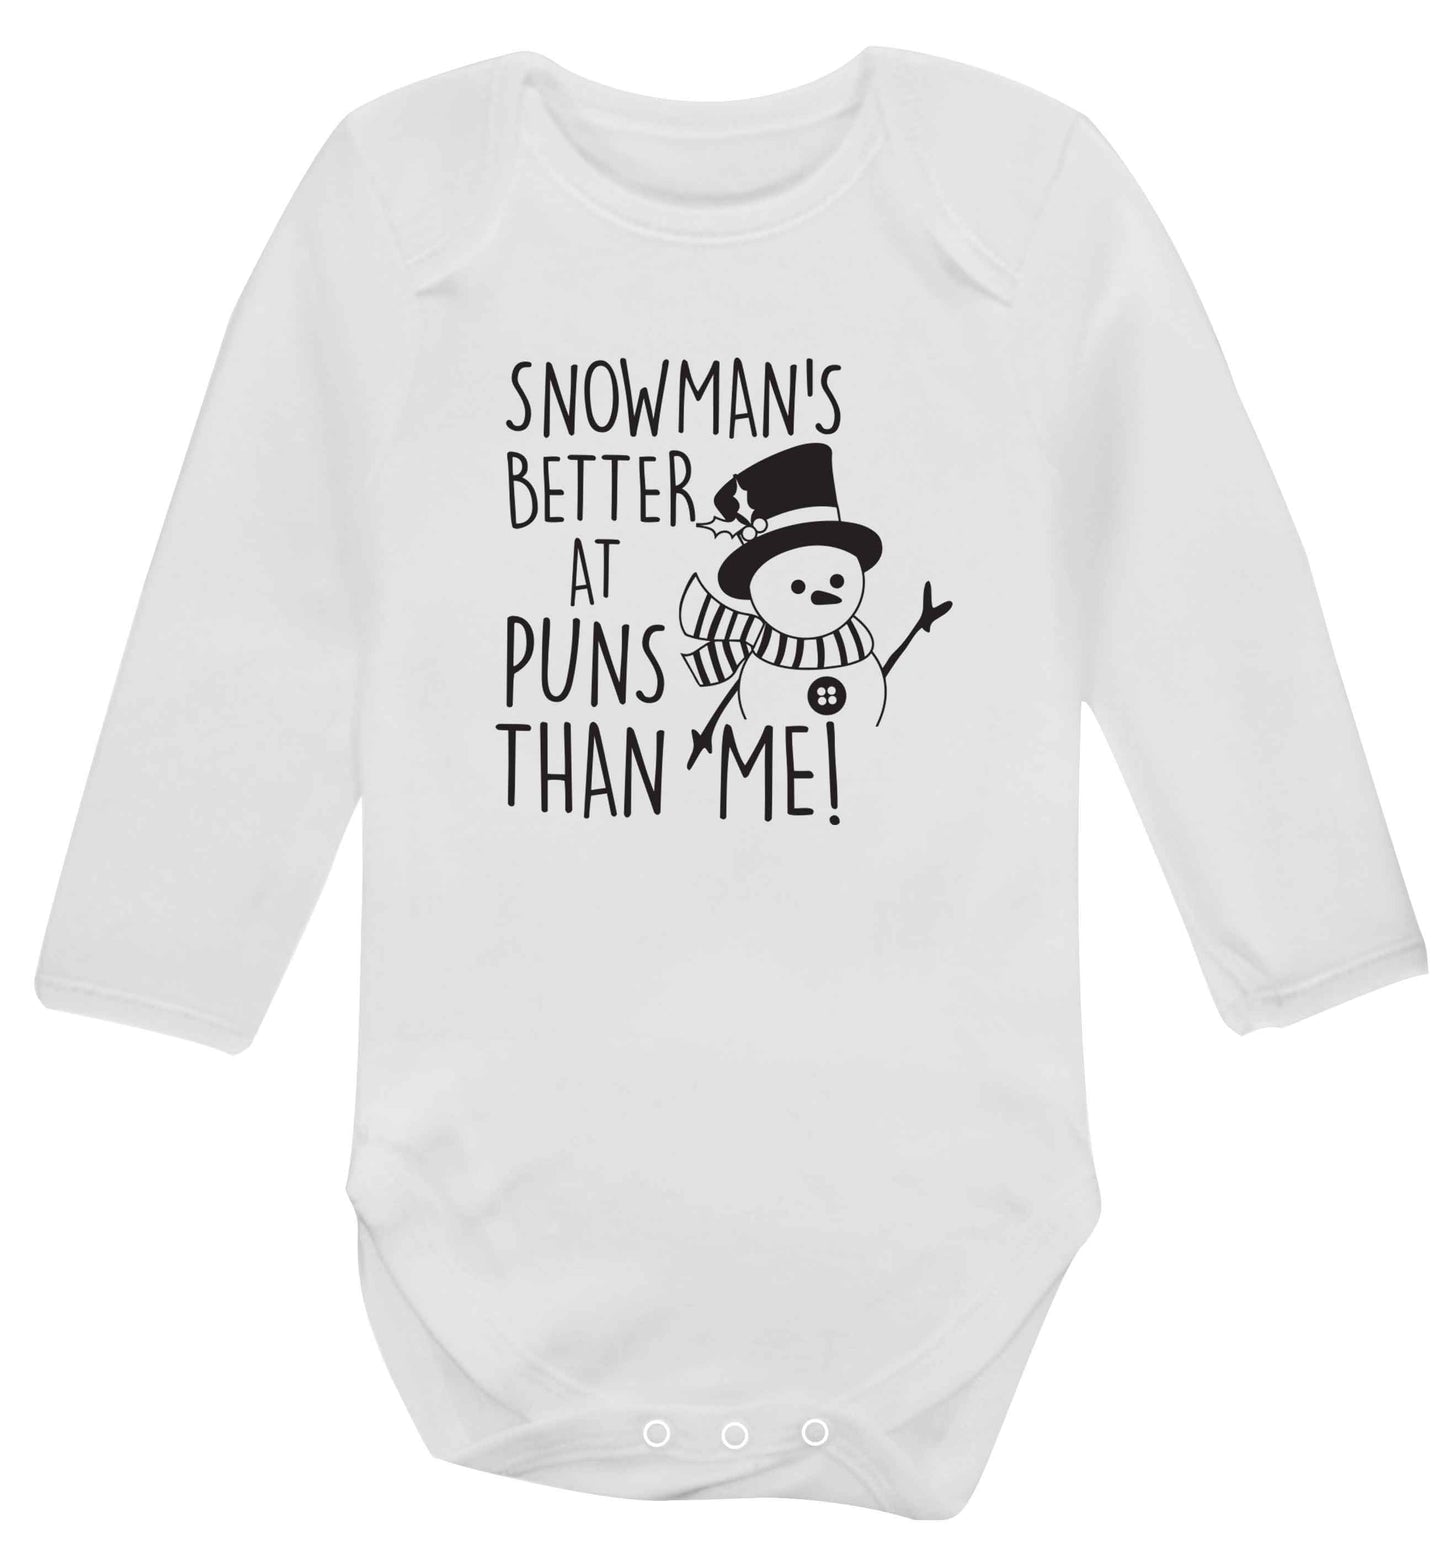 Snowman's Puns Me baby vest long sleeved white 6-12 months